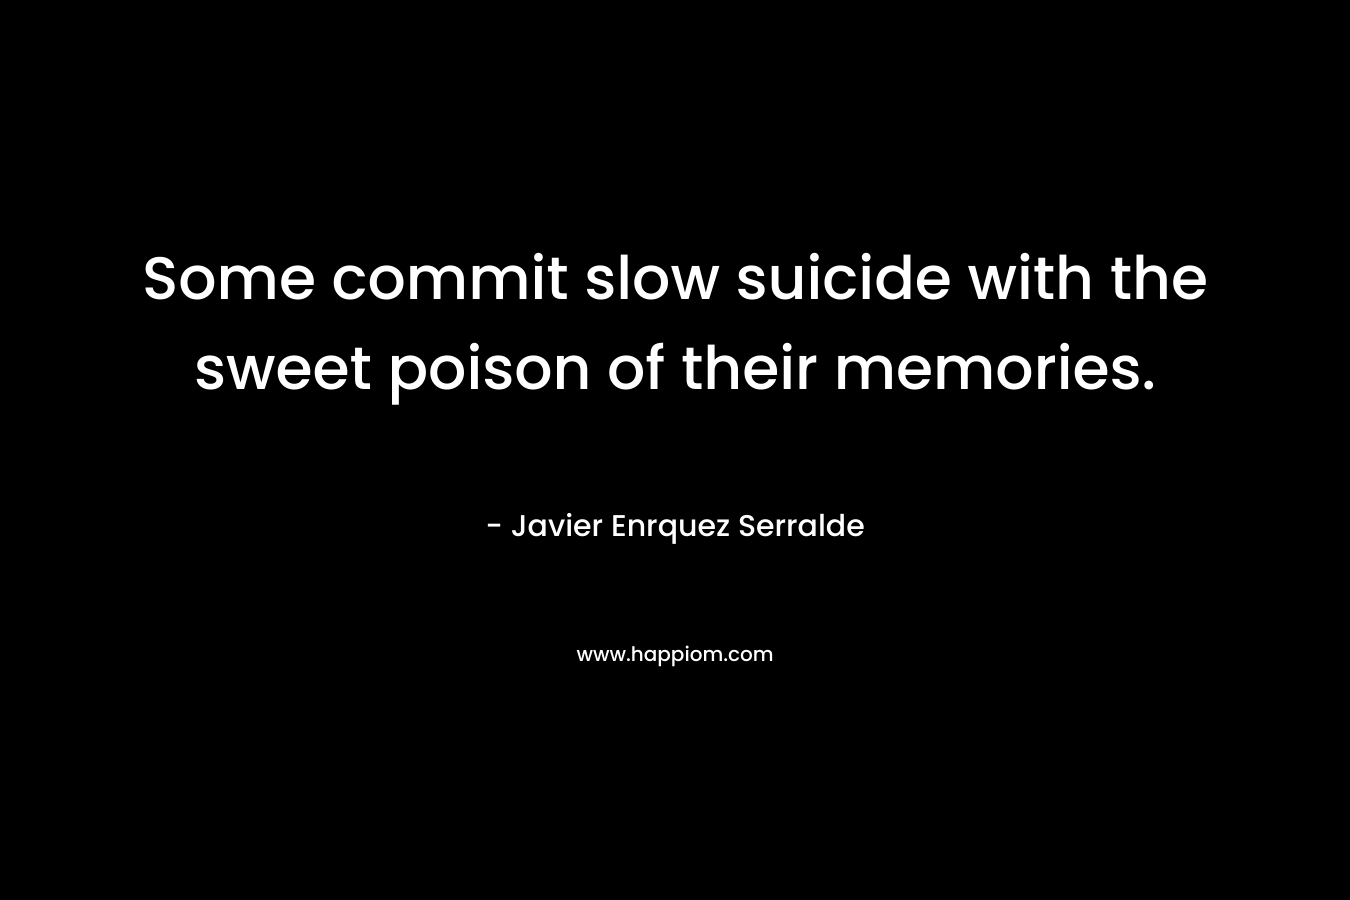 Some commit slow suicide with the sweet poison of their memories.